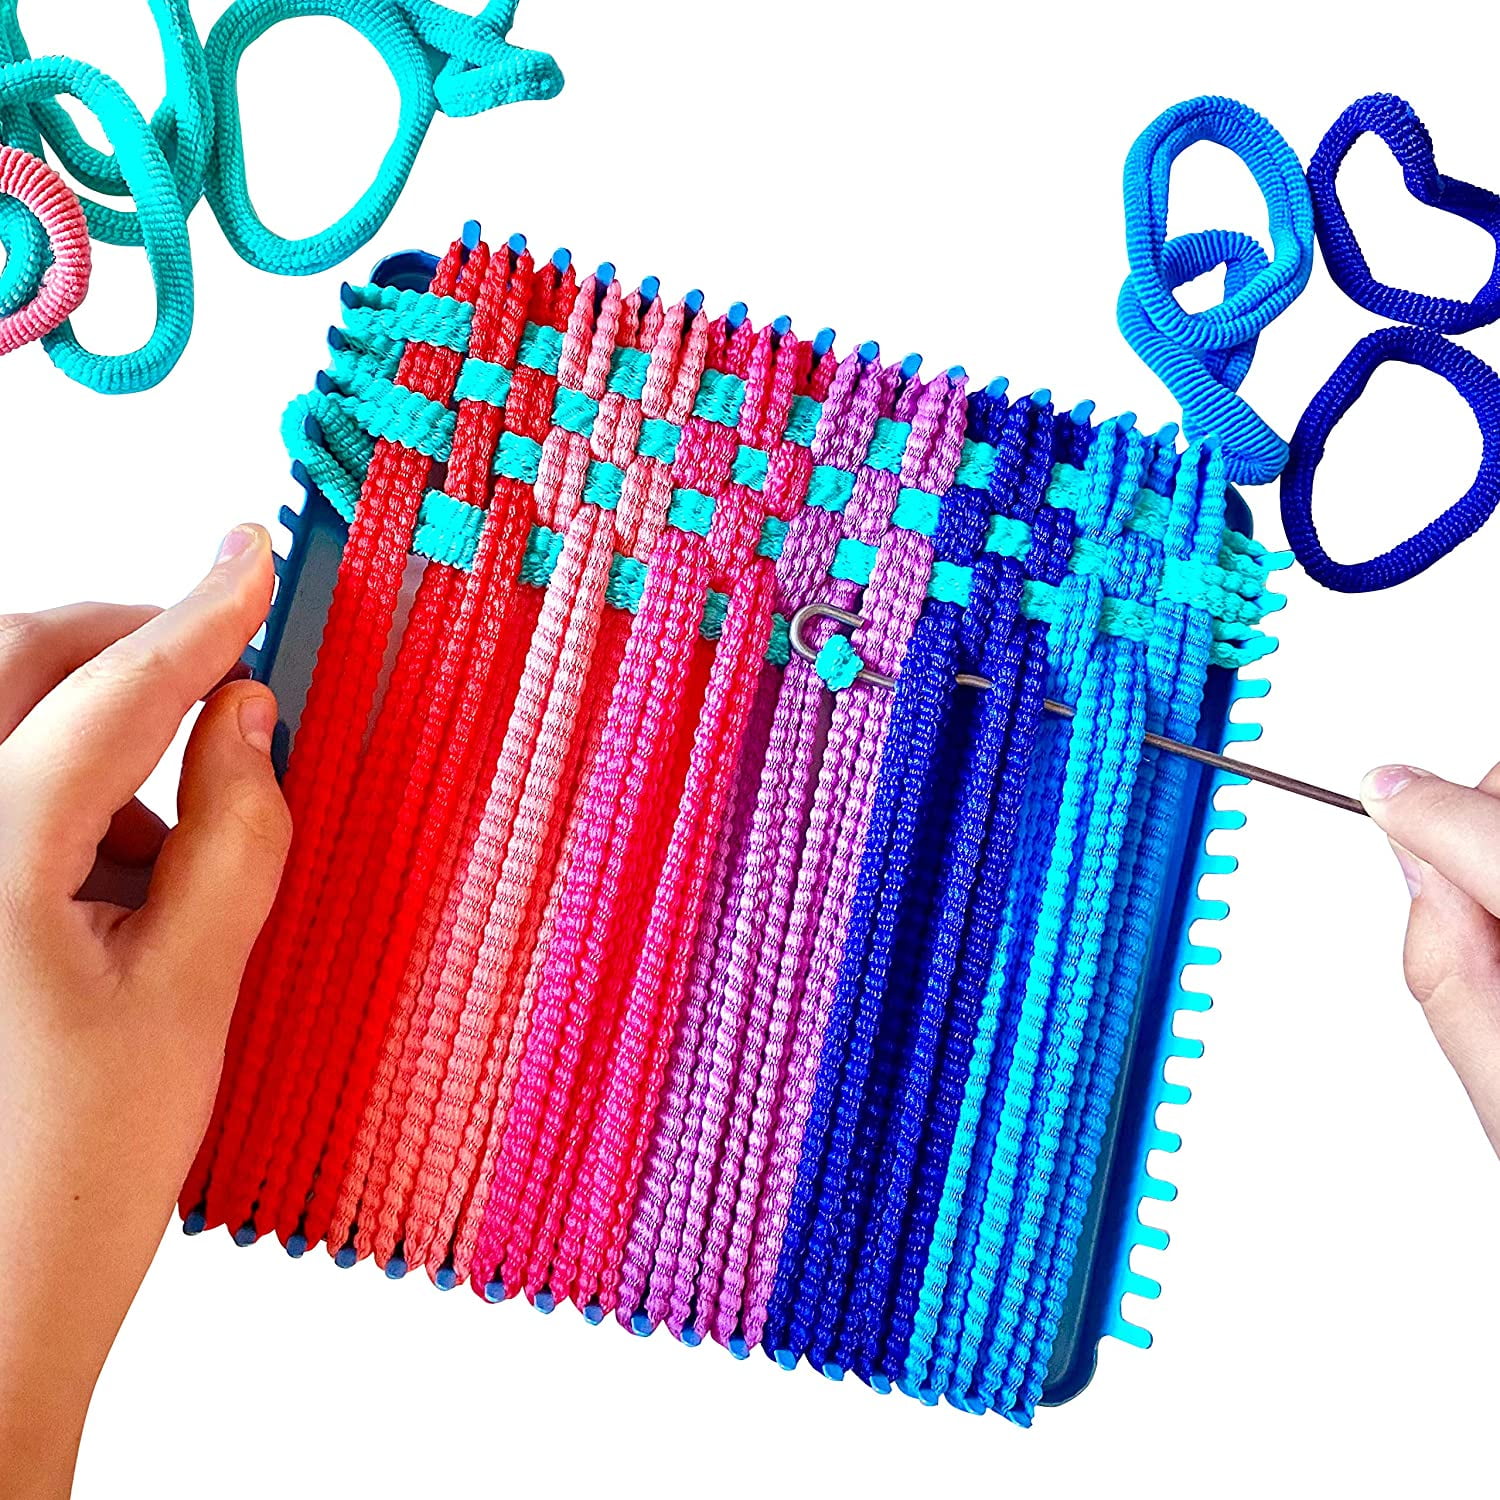 Hapinest Make Your Own Potholders Weaving Loom Kit Arts and Crafts Kit for Kids Girls and Boys Ages 6 7 8 9 10 11 12 13 Years